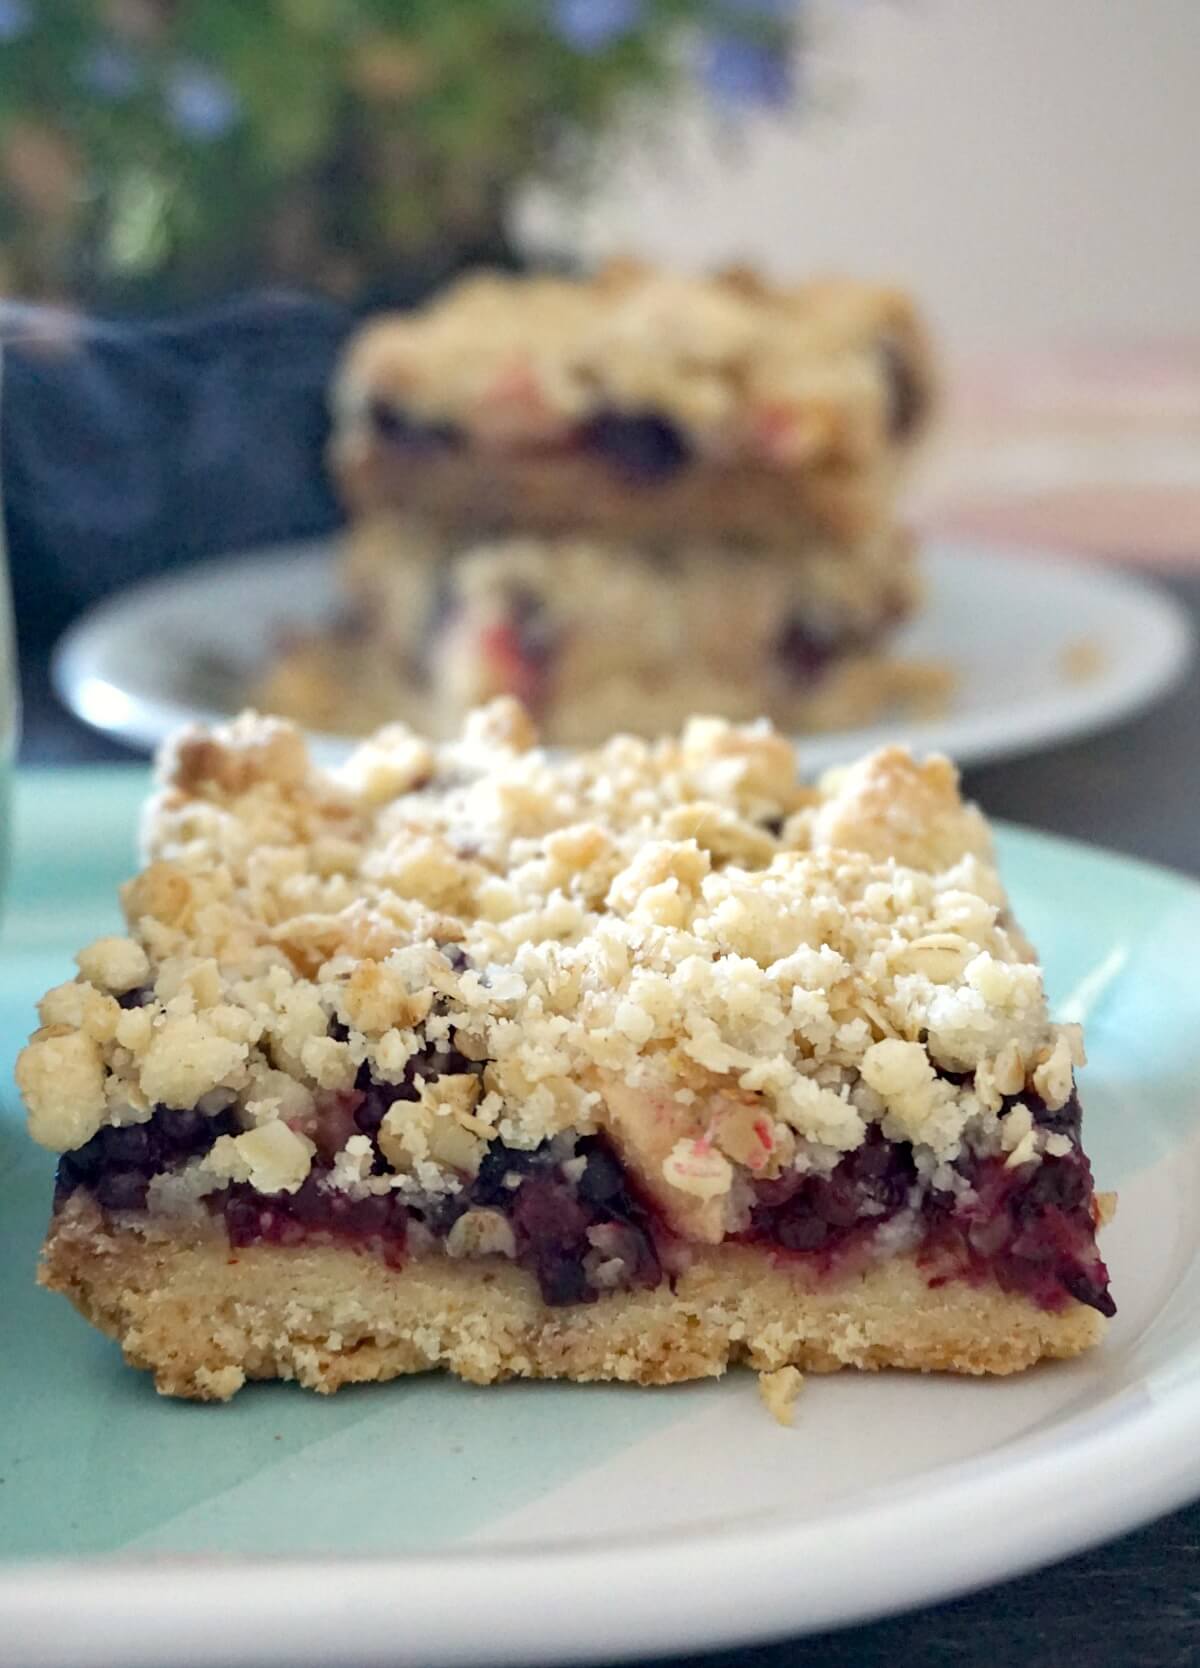 A slice of apple and blackberry crumble bar on a light blue plate.